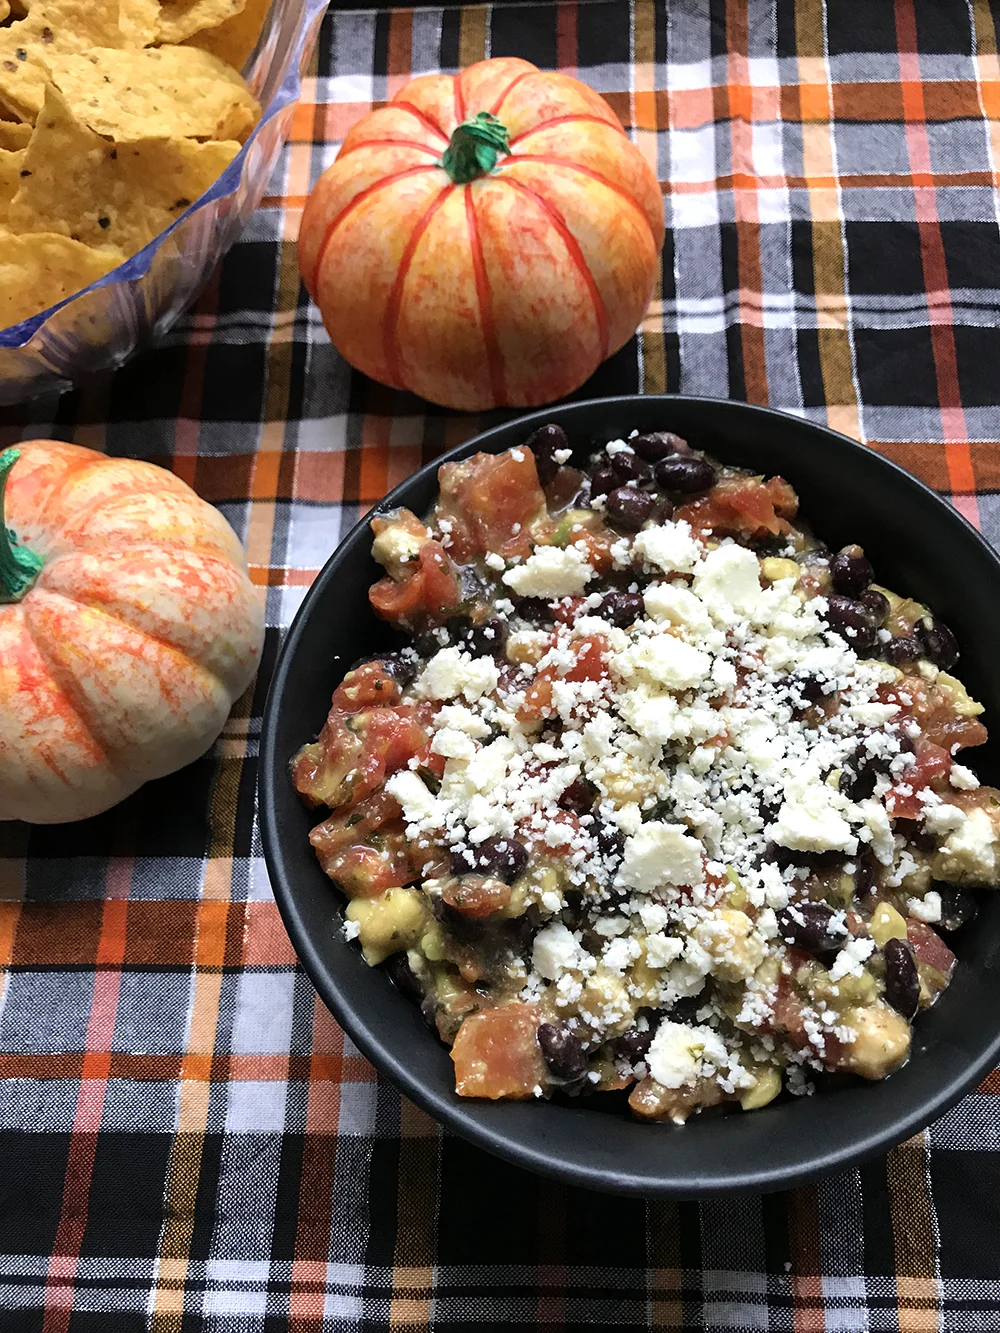 Black Bean, Tomato, Avocado and Cotija Cheese Dip in a black bowl on an orange, black and white plaid cloth. Two small pumpkins are nearby.